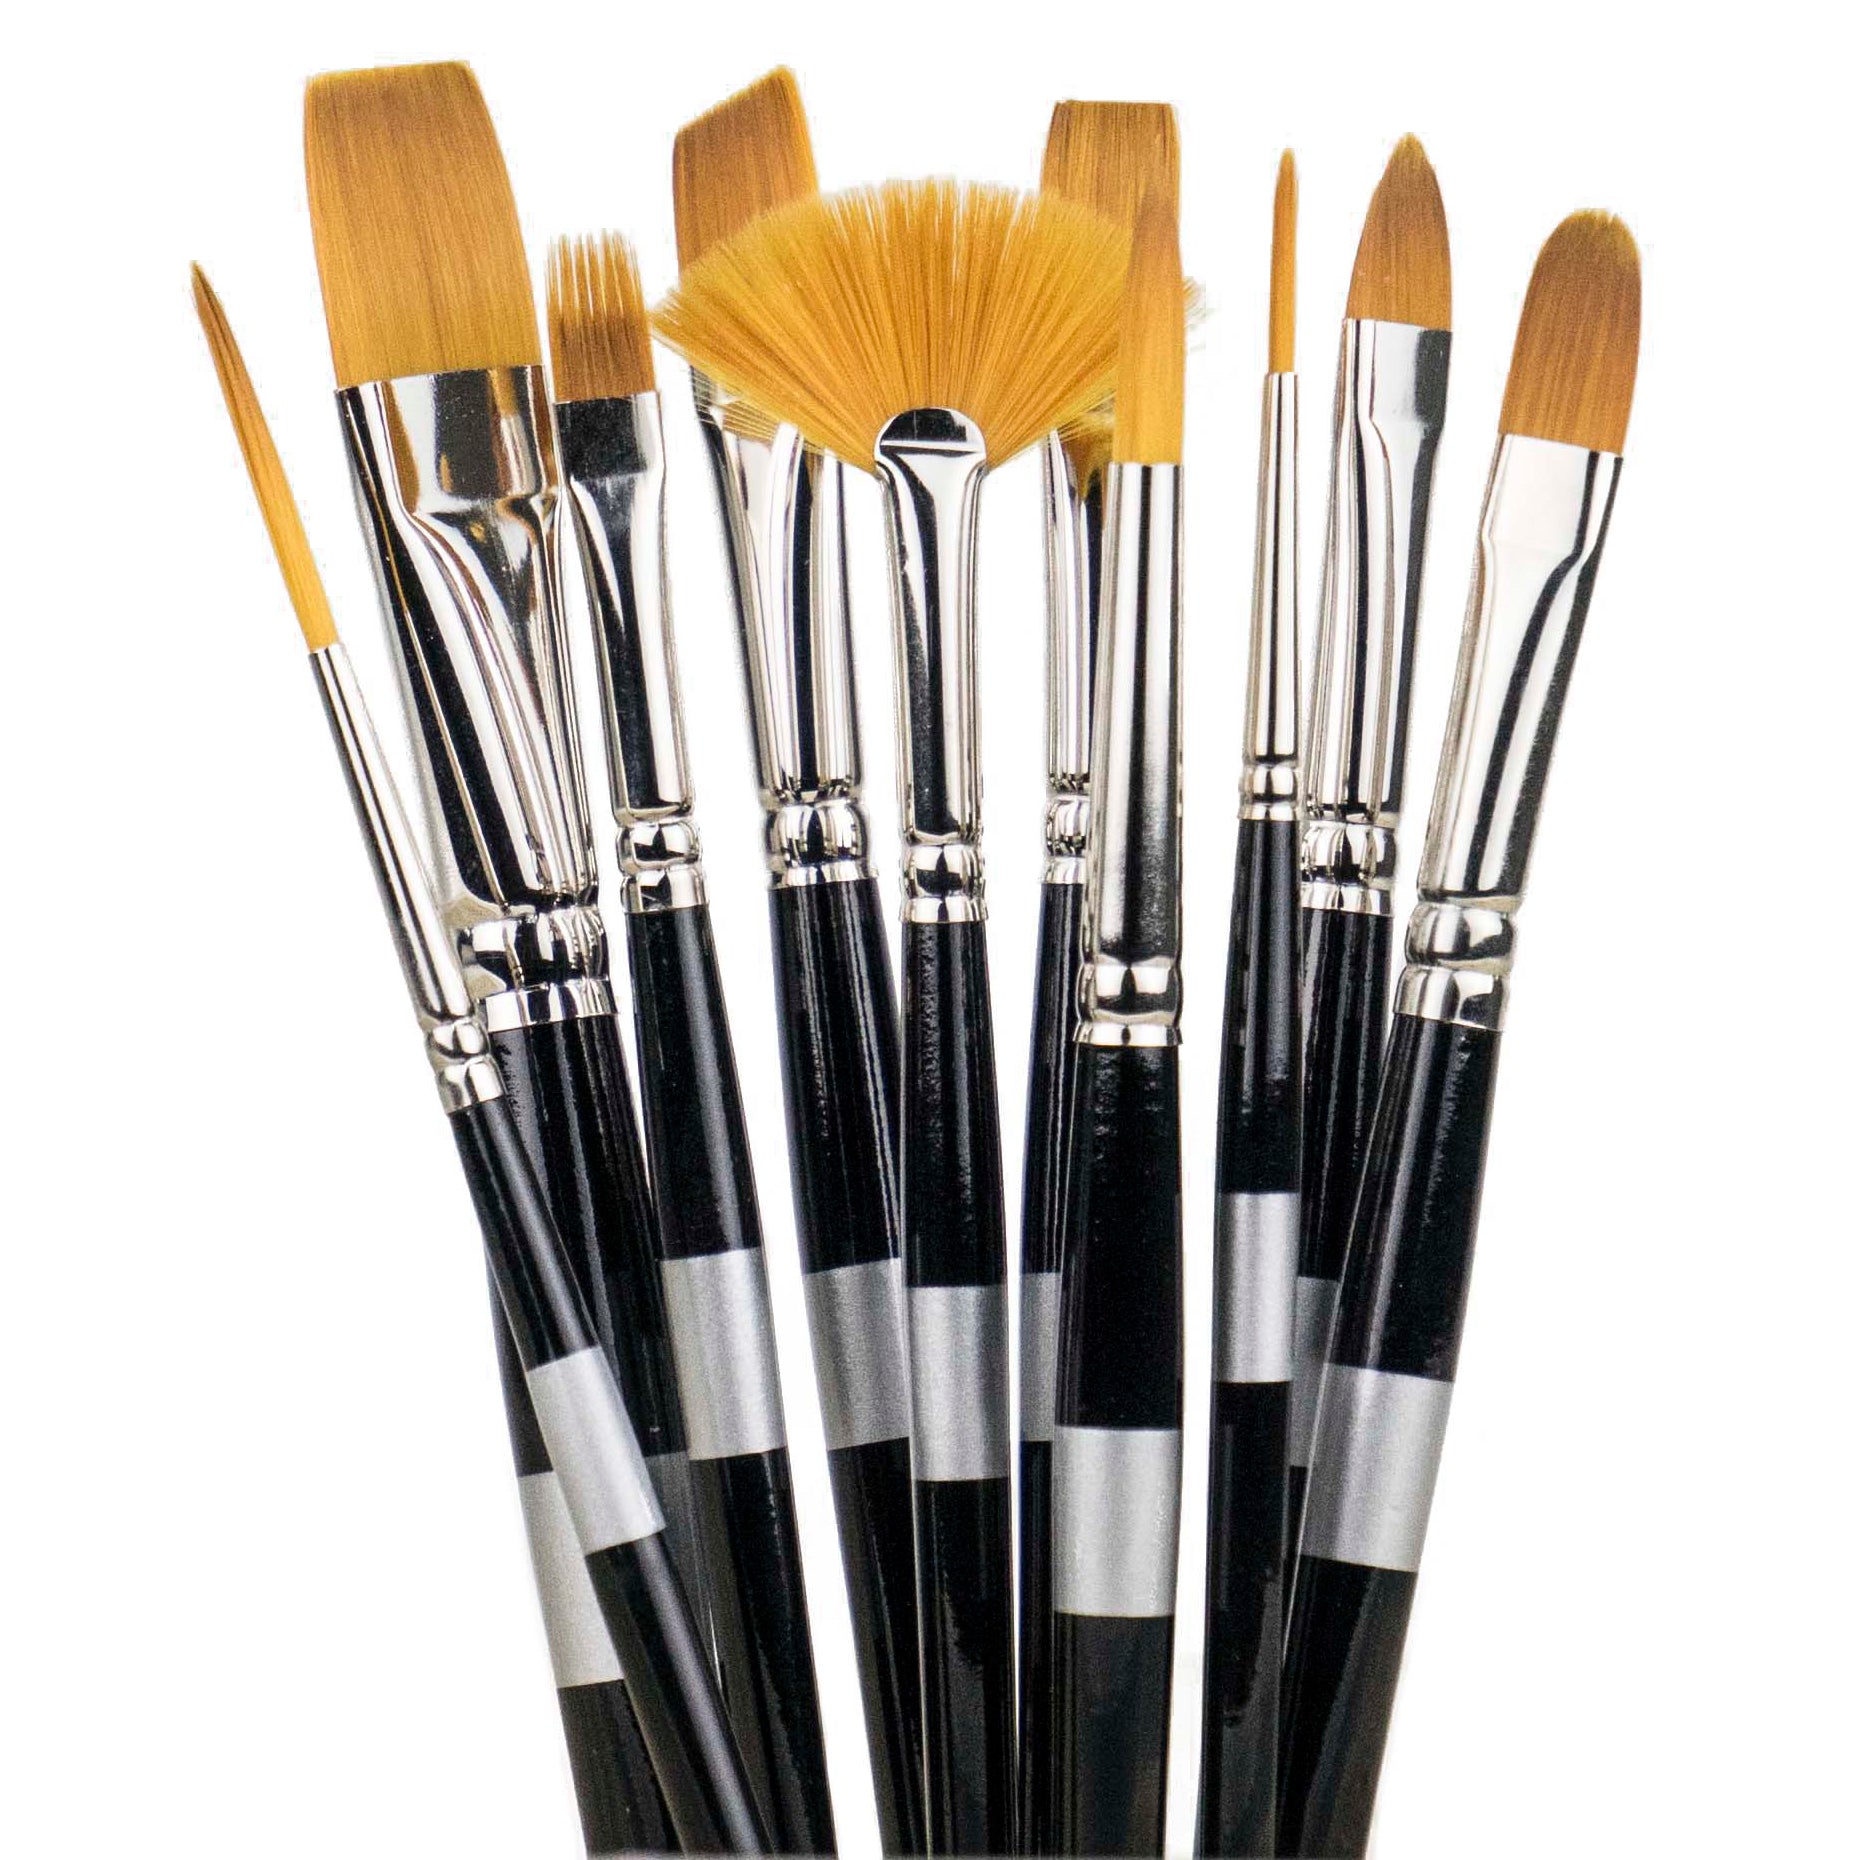 Trekell Golden Taklon Brushes for Acrylic and Watercolor Painting